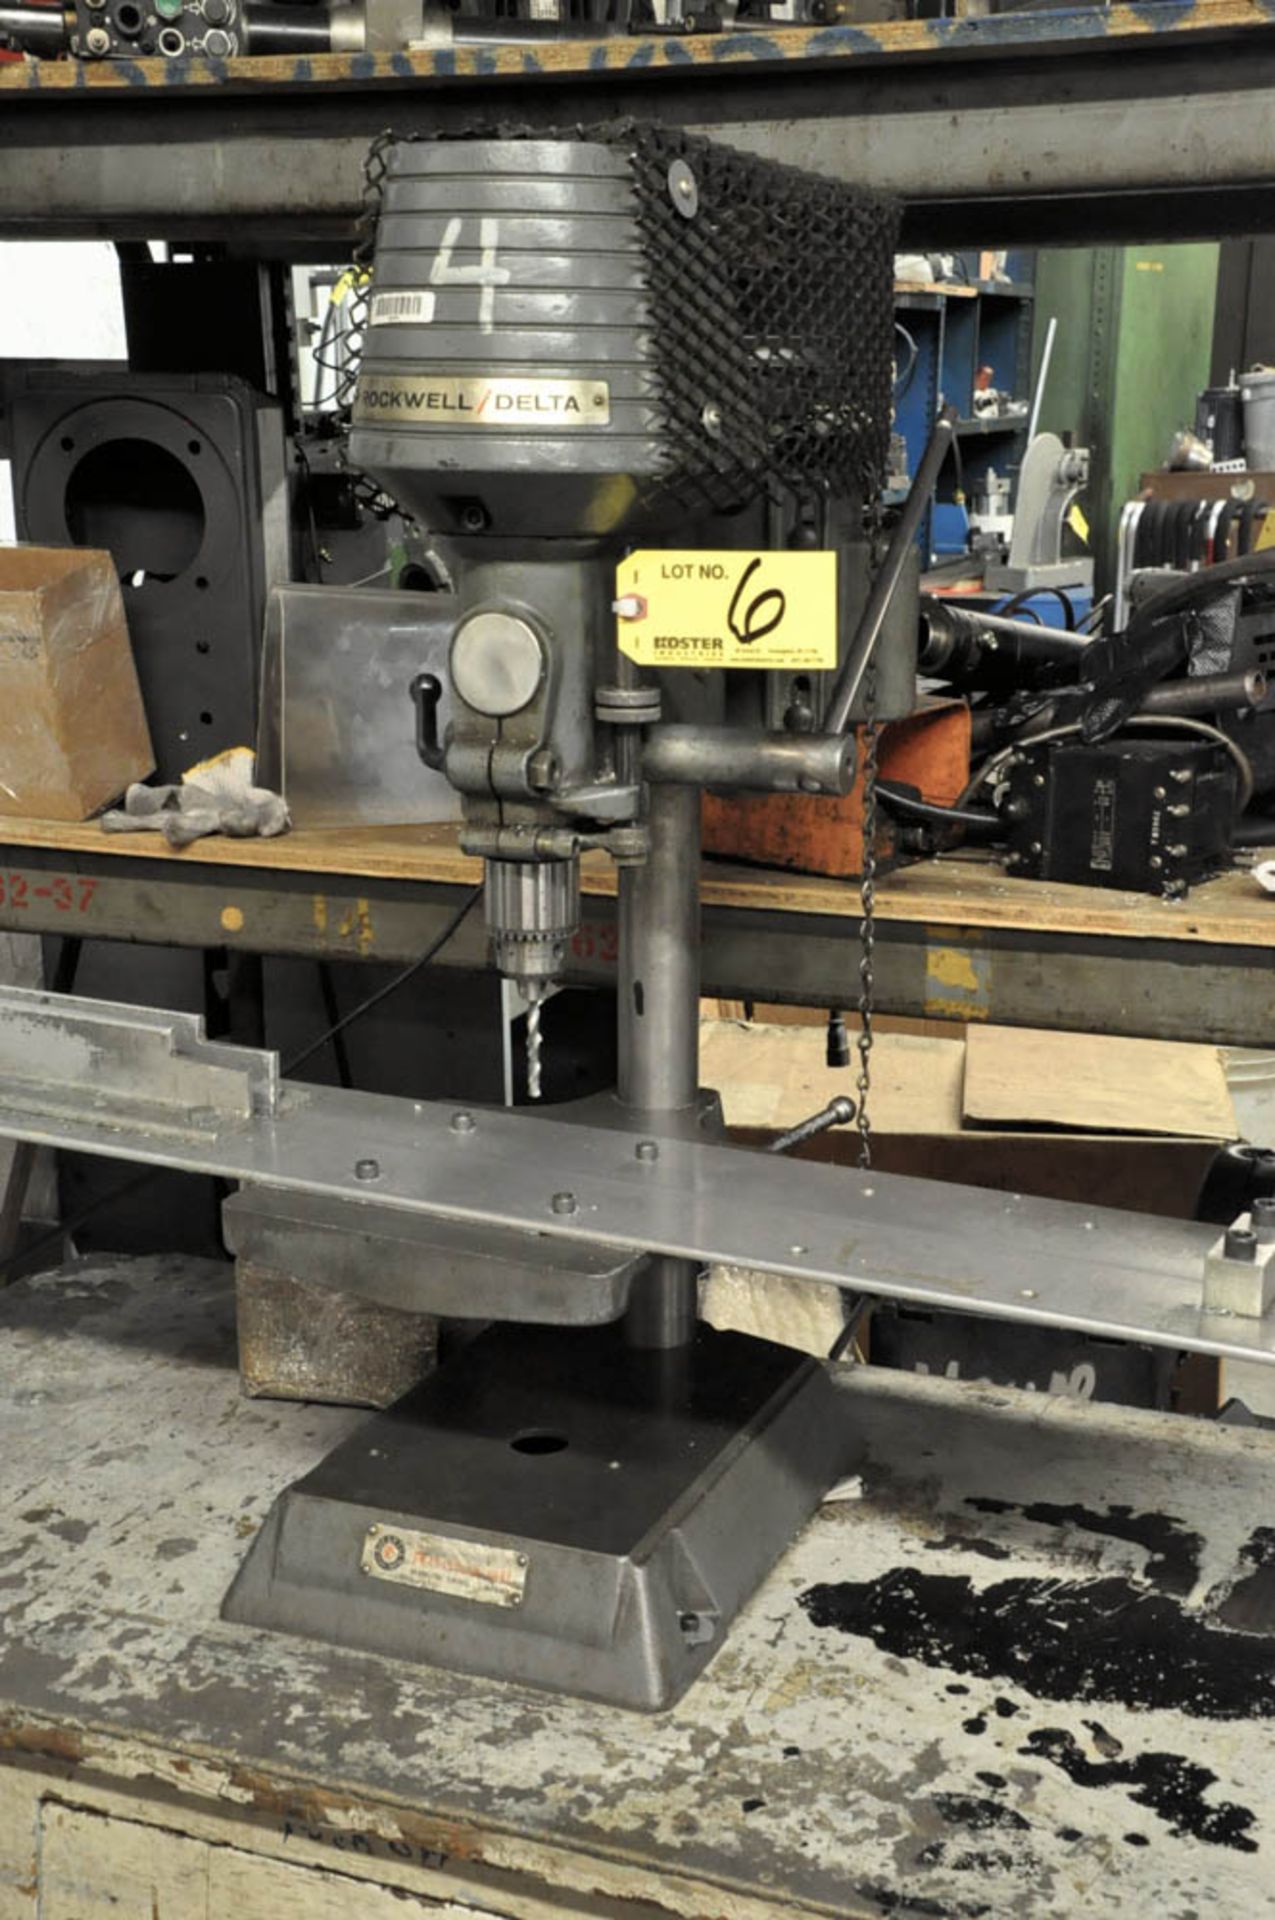 ROCKWELL/DELTA MDL. 11-100, 11" BENCH TOP DRILL PRESS, 9" X 8 1/2" WORK SURFACE, WITH STAND, S/N: